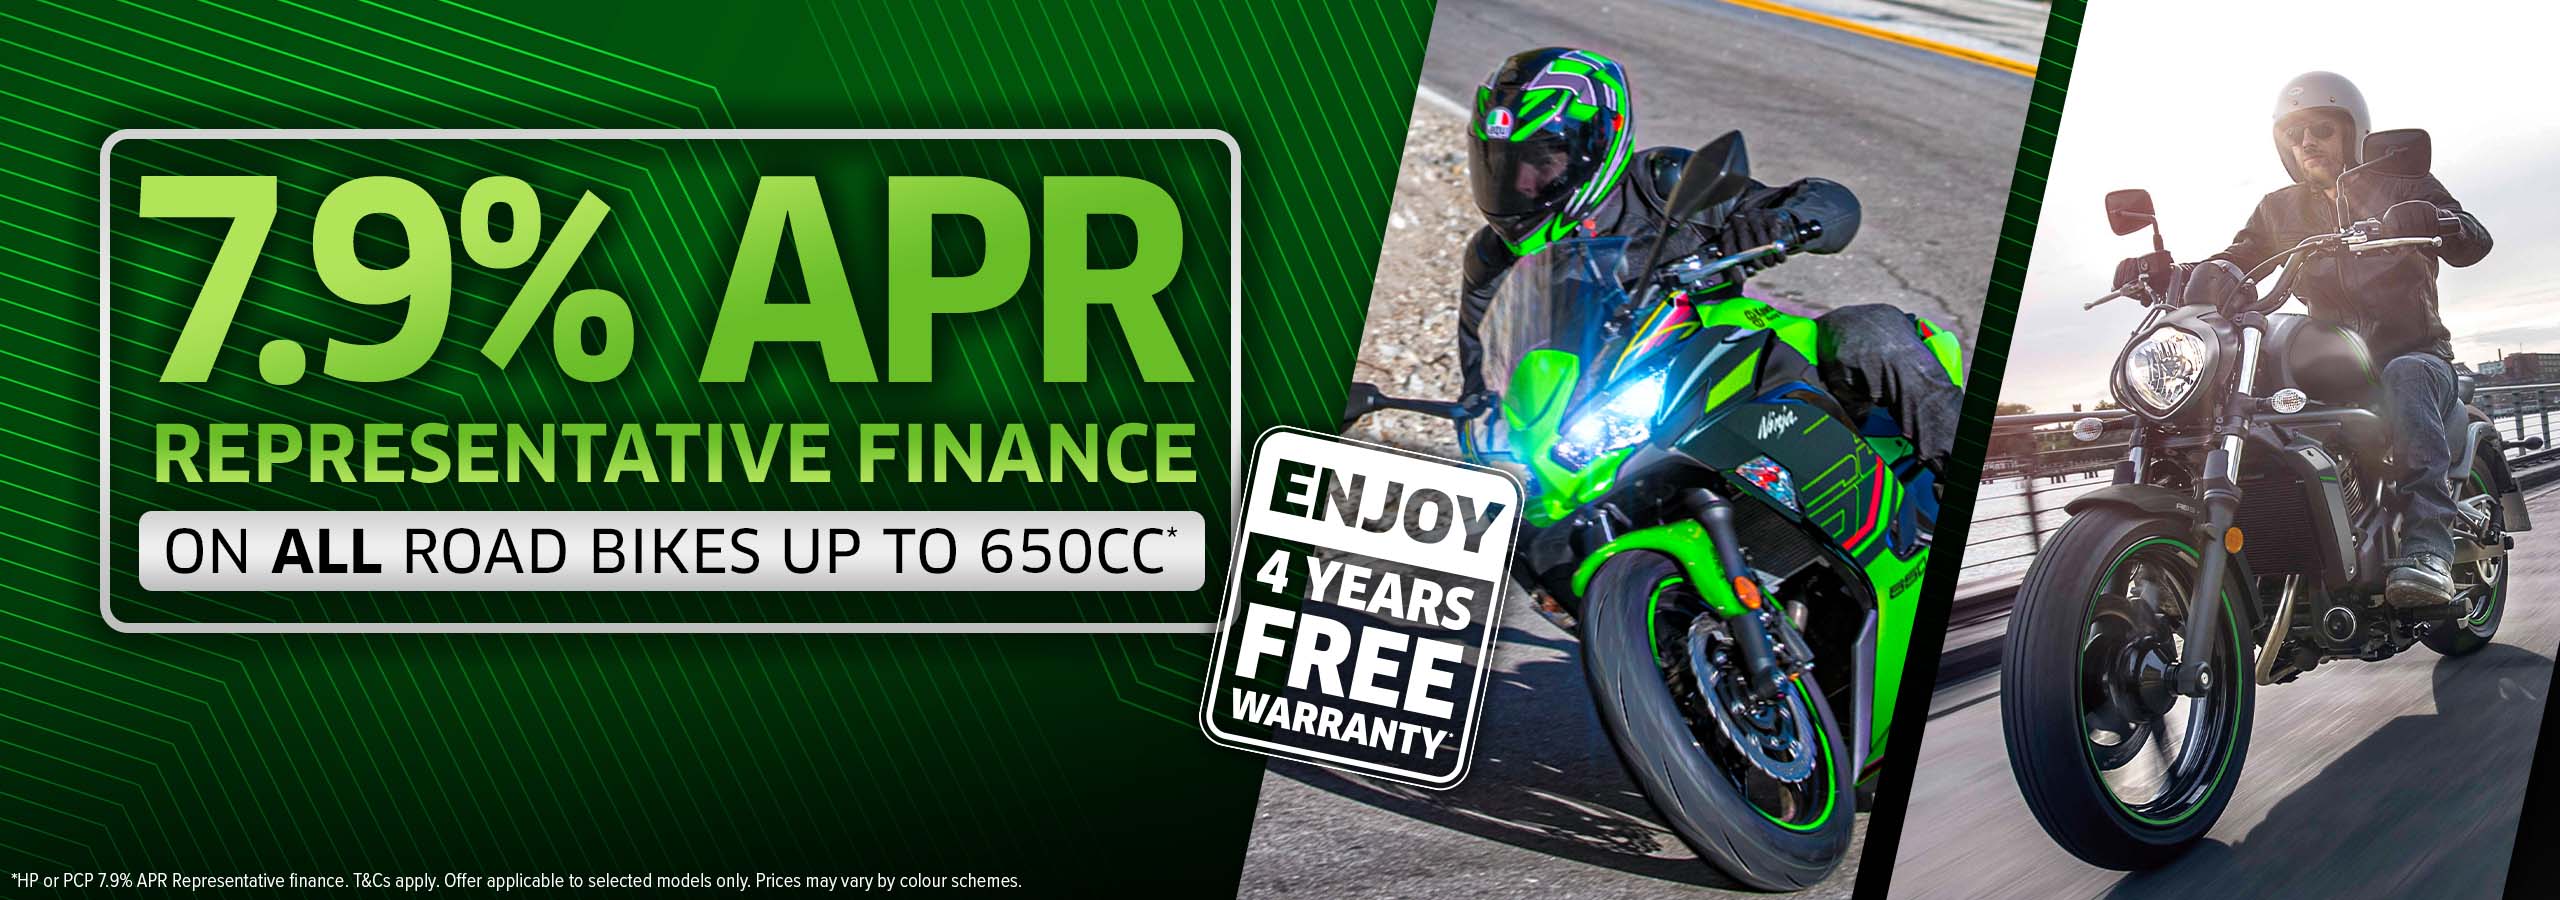 Kawasaki Finance Offers on Bikes 650cc and Under at Laguna Motorcycles in Maidstone and Ashford